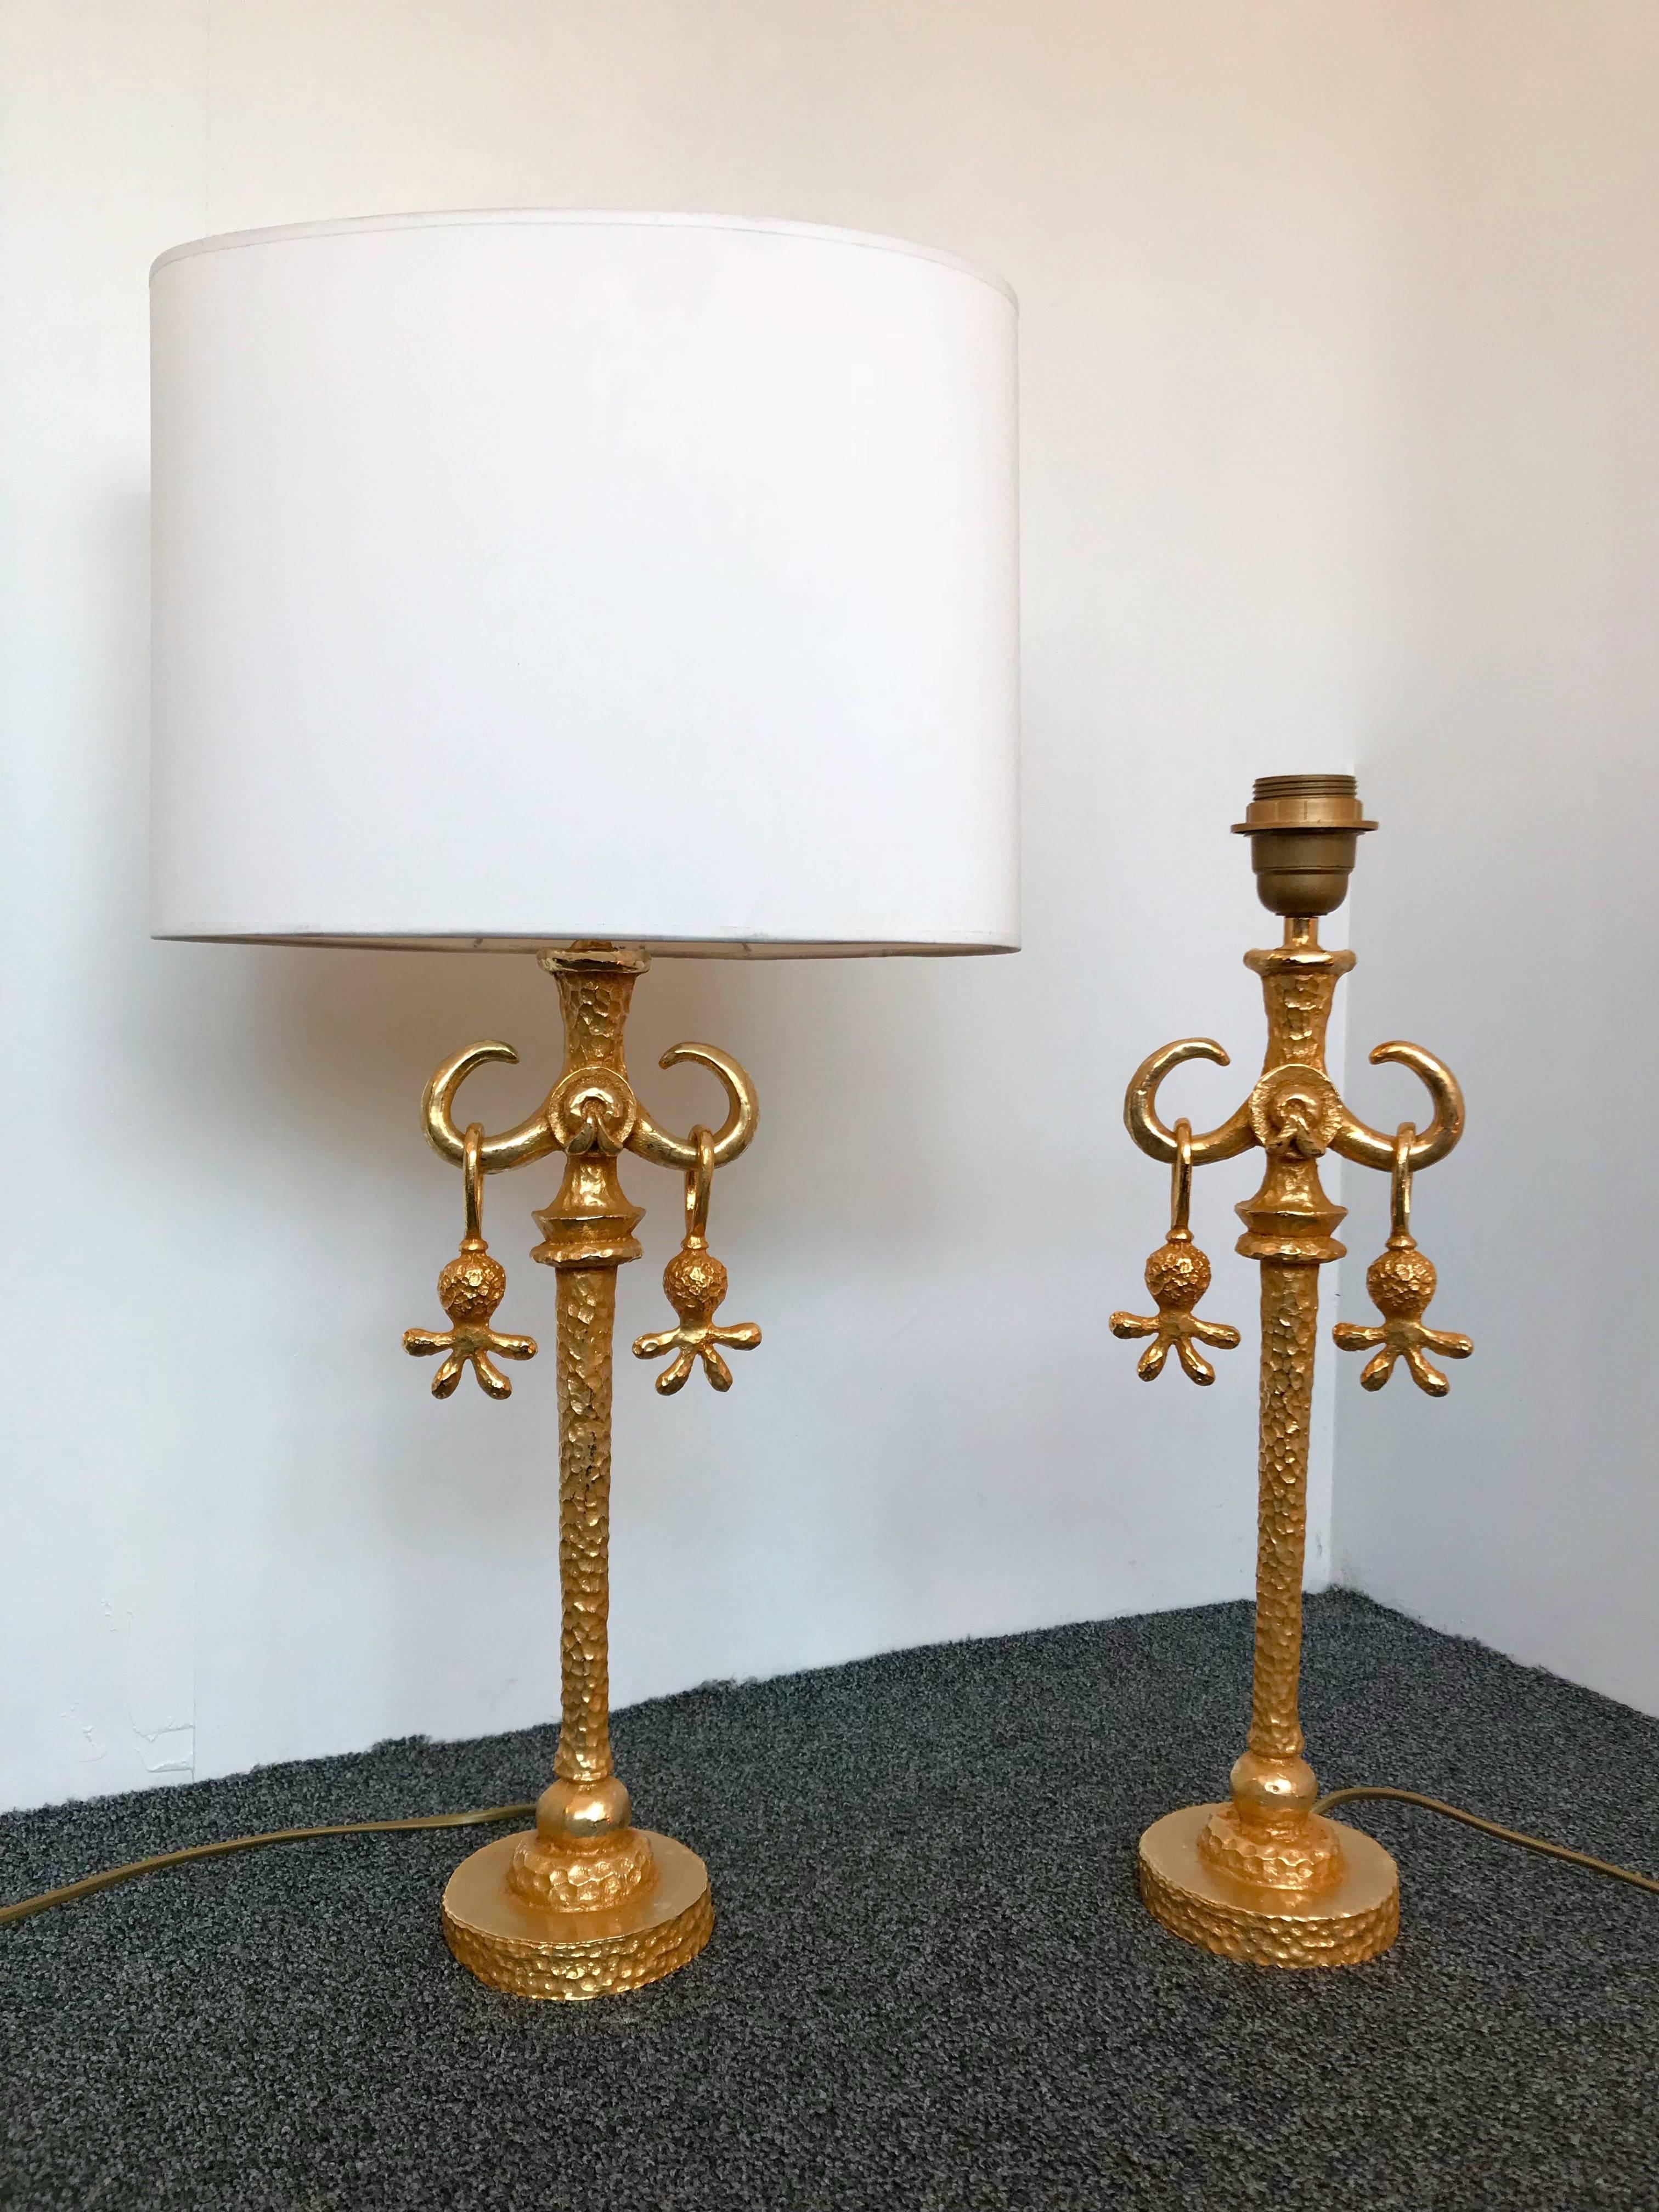 French Pair of Gilt Bronze Lamps by Nicolas Dewael for Fondica, France, 1990s